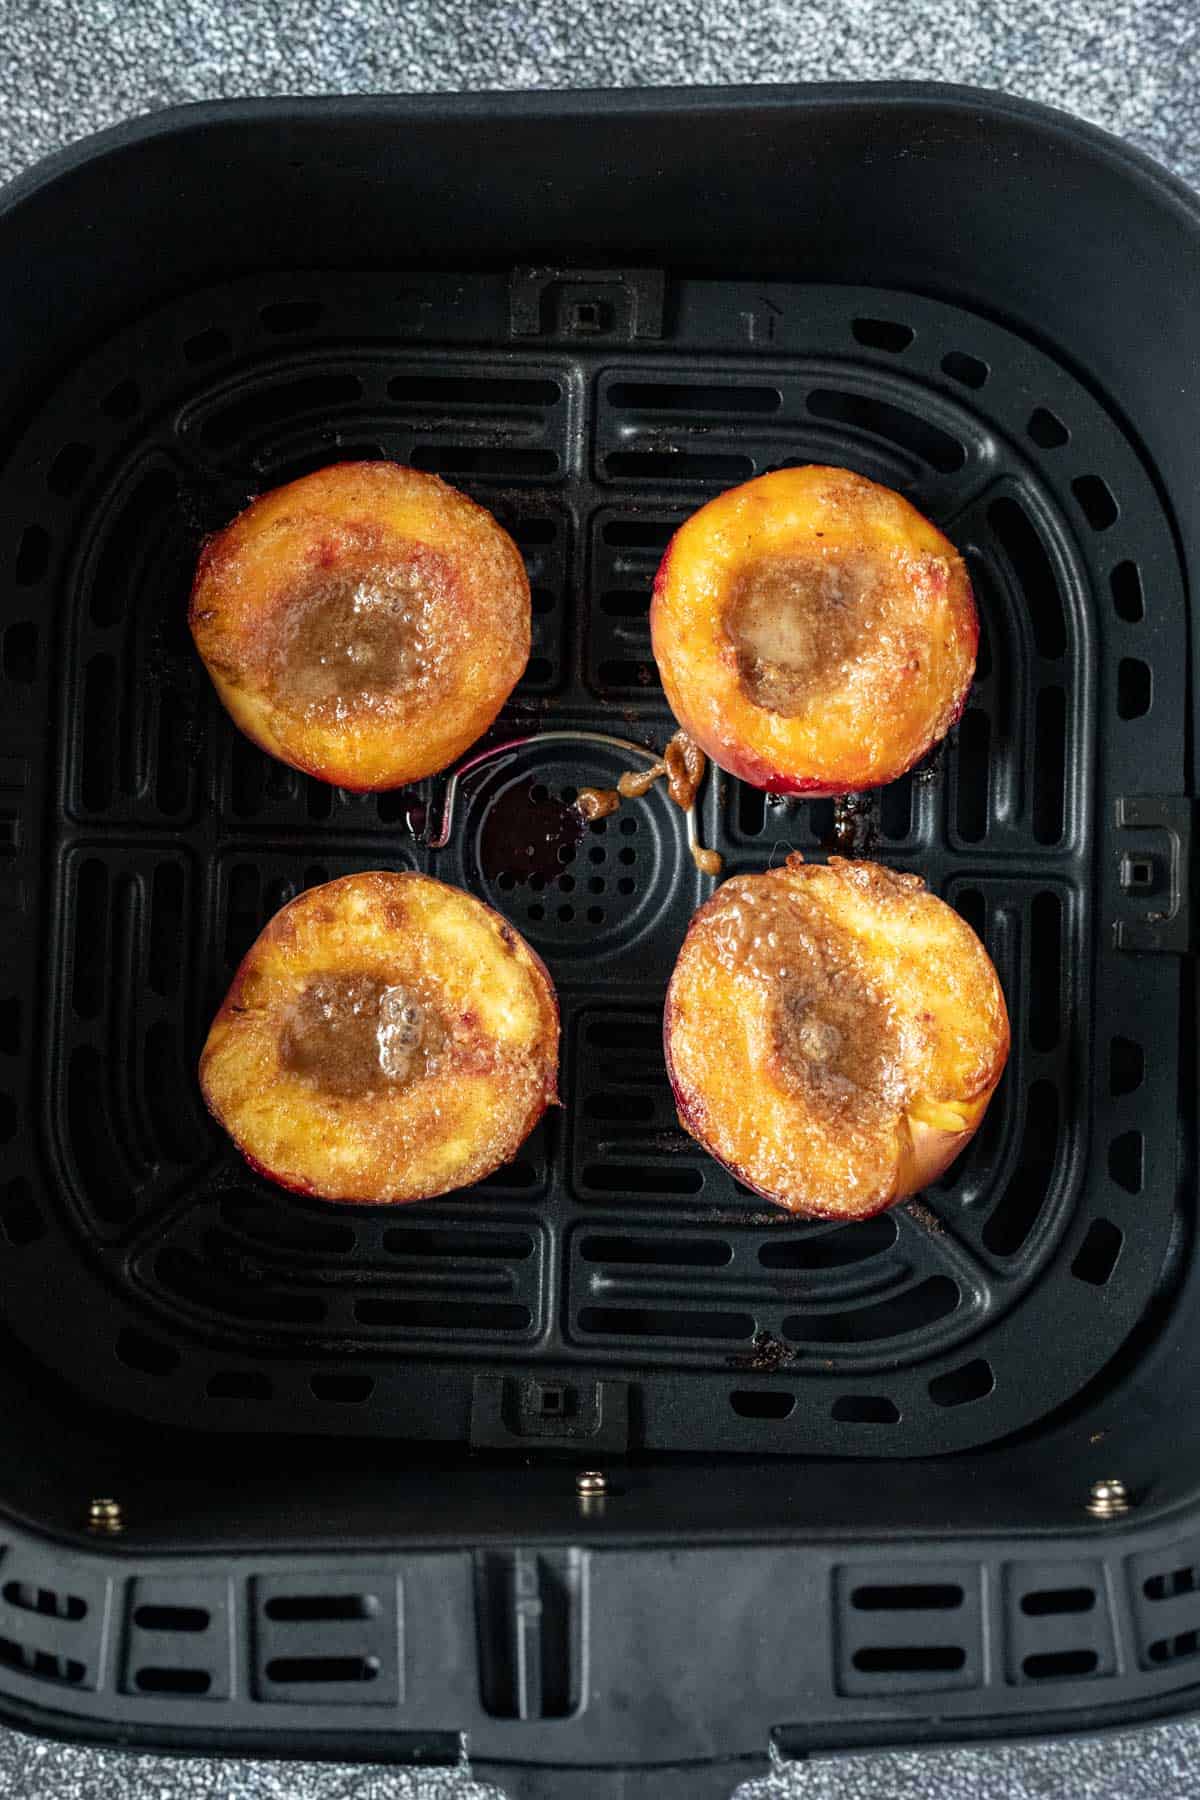 four peach halves after cooking in the air fryer.